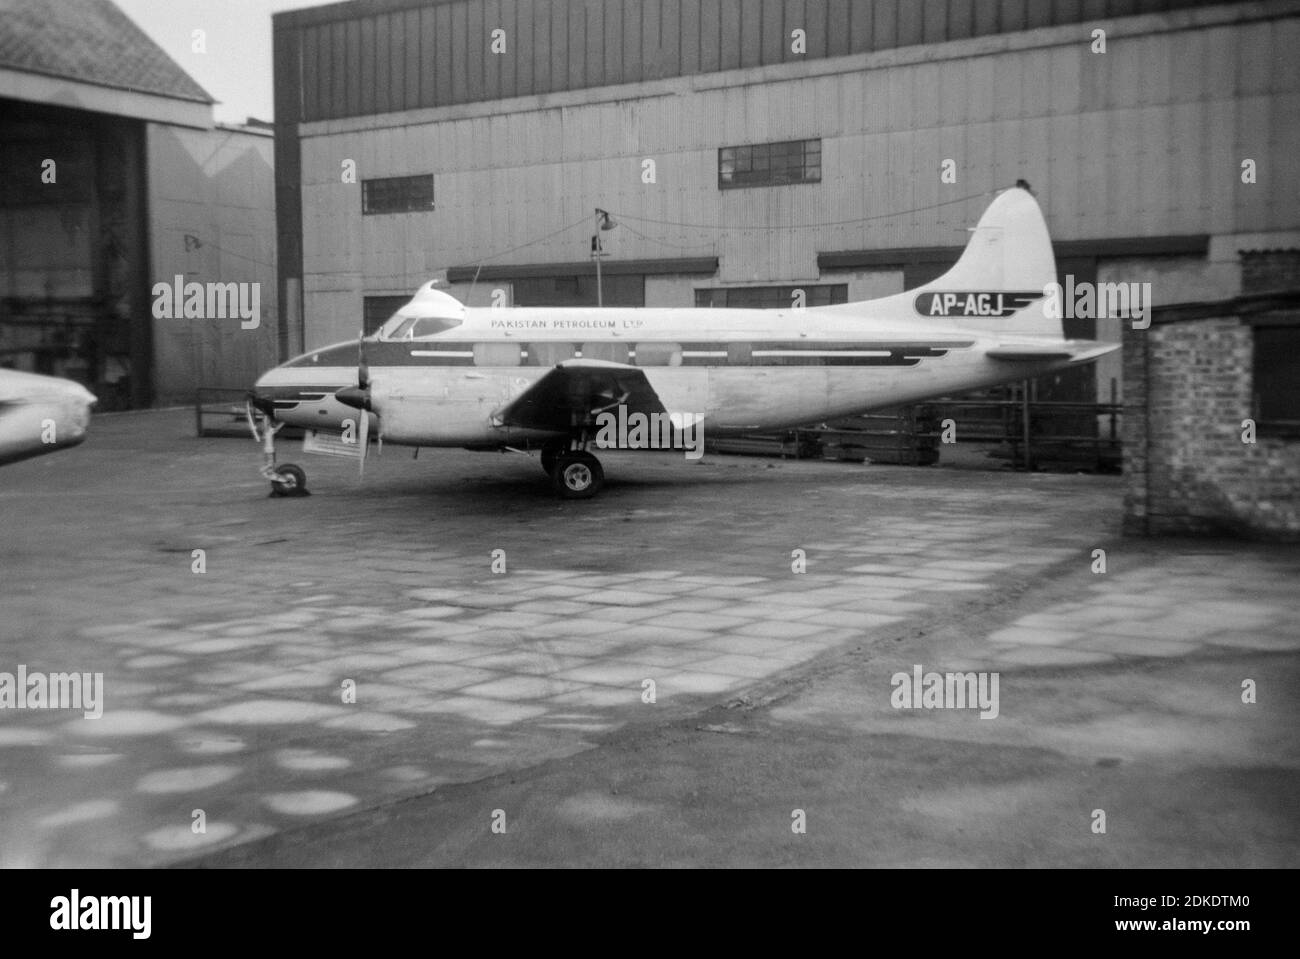 A vintage black and white photograph taken at London Gatwick Airport in 1967 showing a De Havilland Dove aircraft, registration AP-AGJ, belonging to Pakistan Petroleum Ltd. Aircraft is parked outside of a hangar. Stock Photo